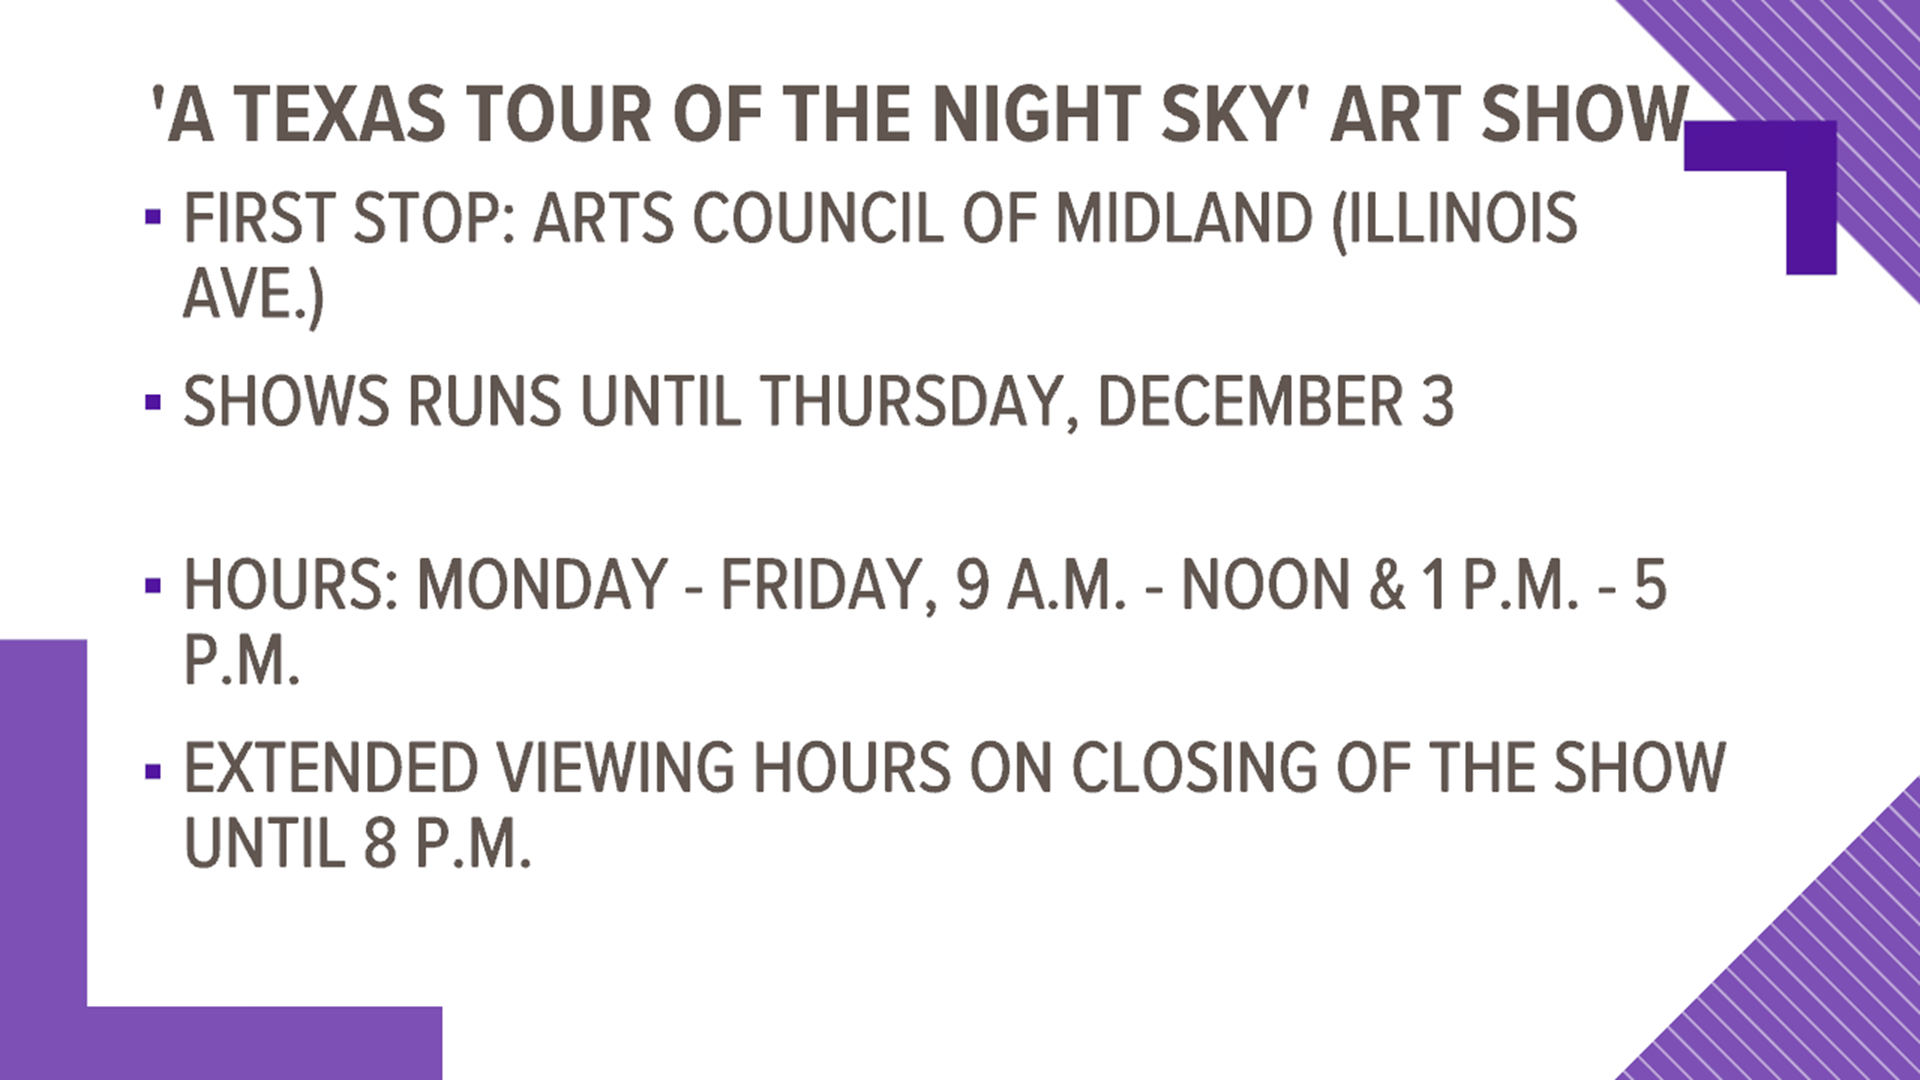 The show's first stop will be at the Arts Council of Midland today.